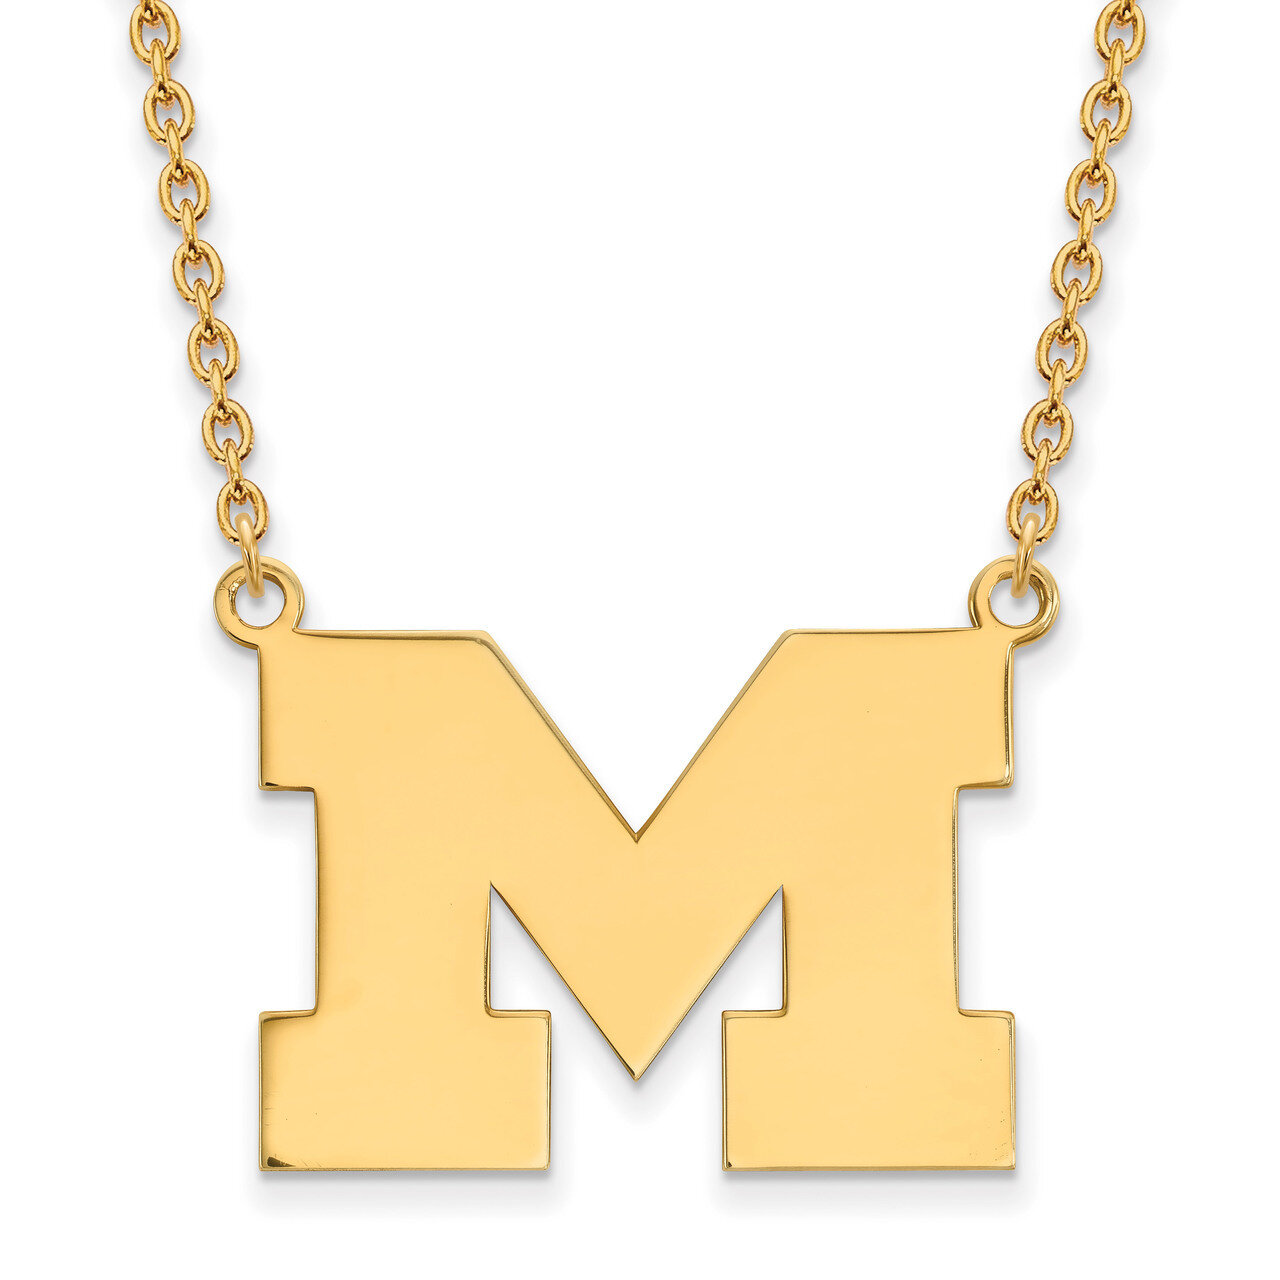 Michigan University of Large Pendant with Necklace Gold-plated Sterling Silver GP016UM-18